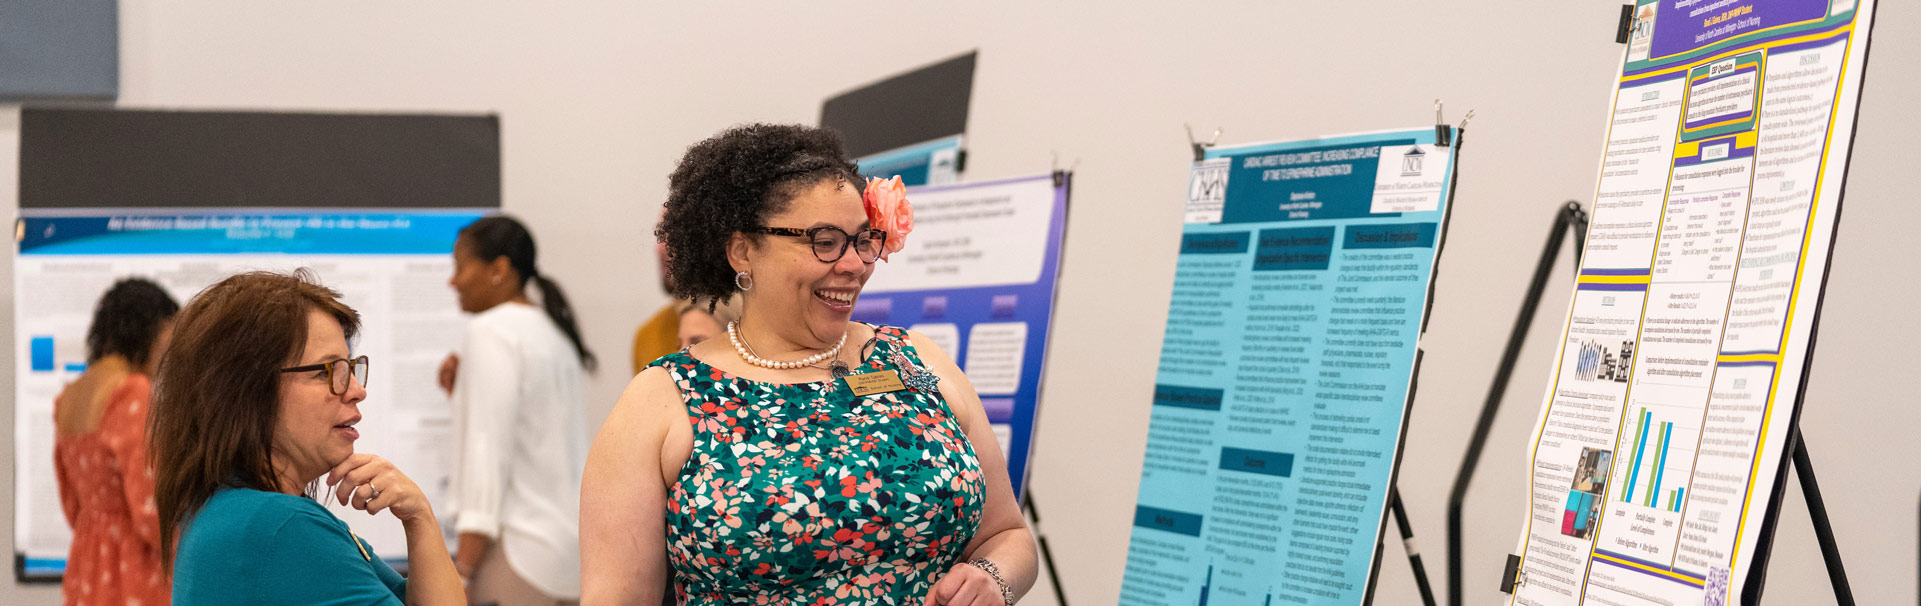 Women looking at a poster presentation